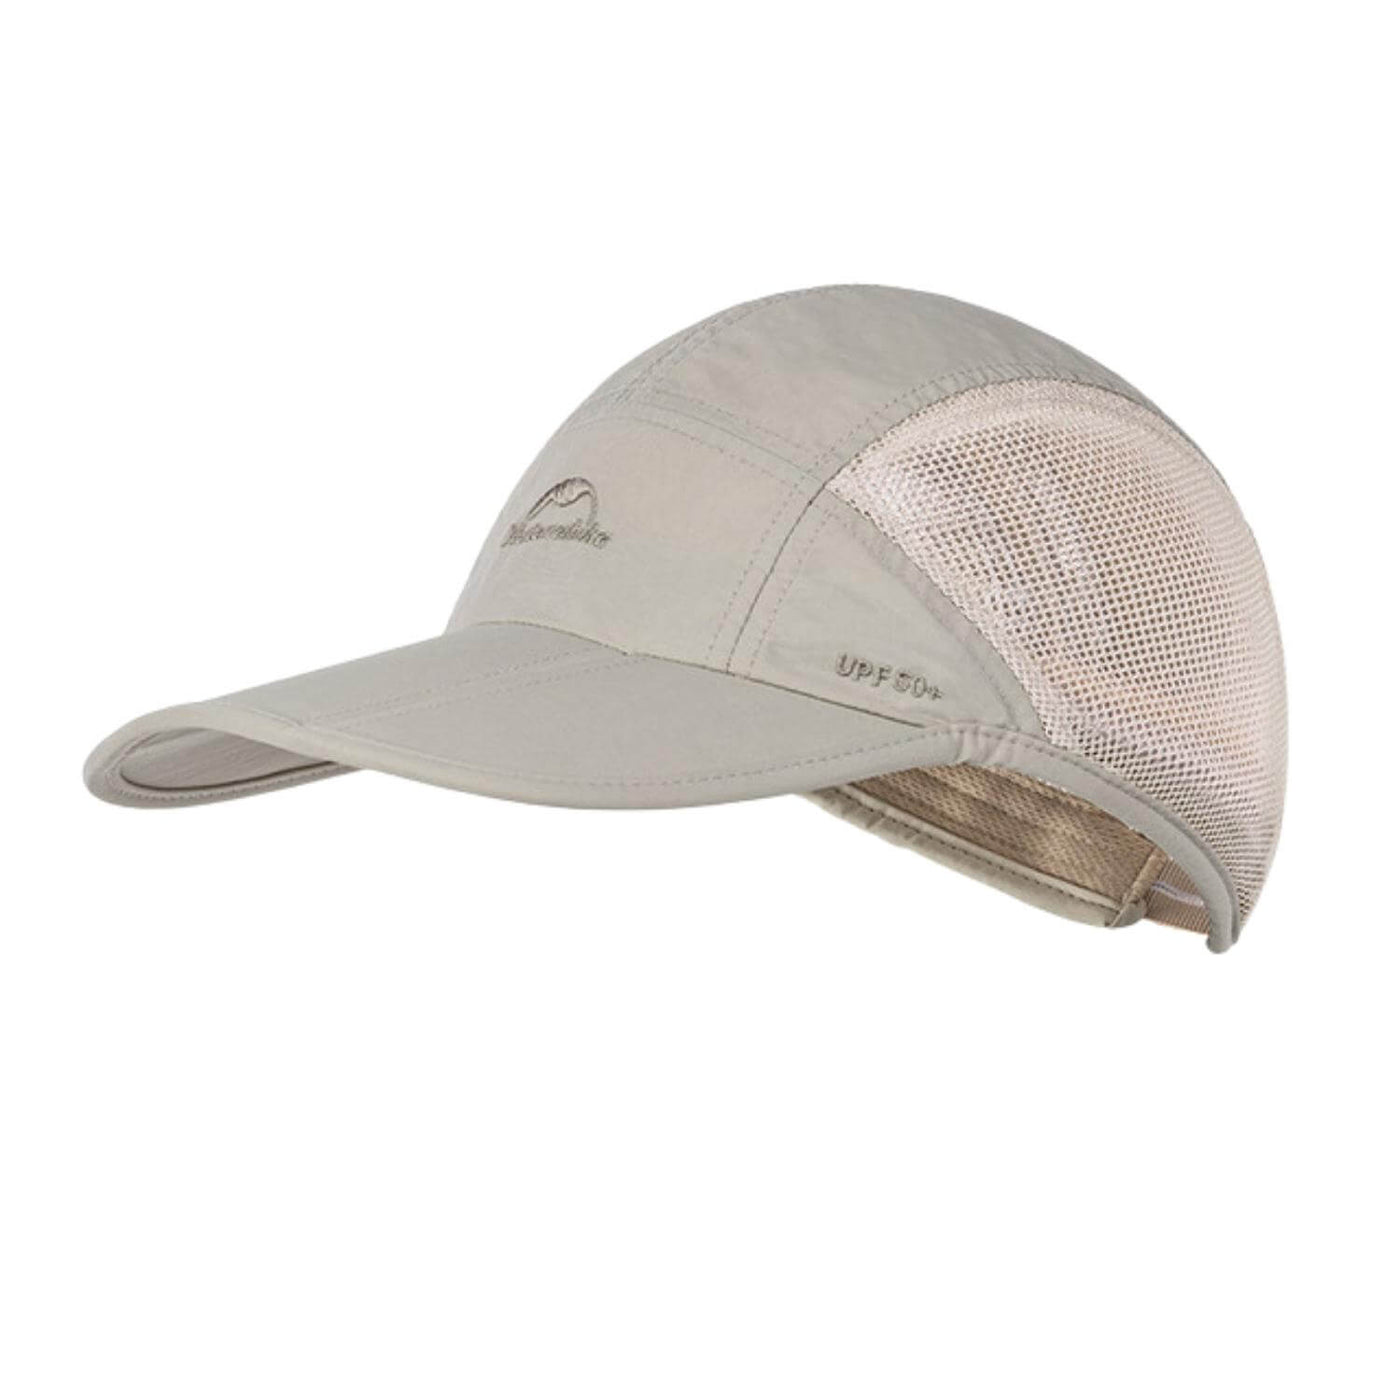 Ultralight cap with UV protection